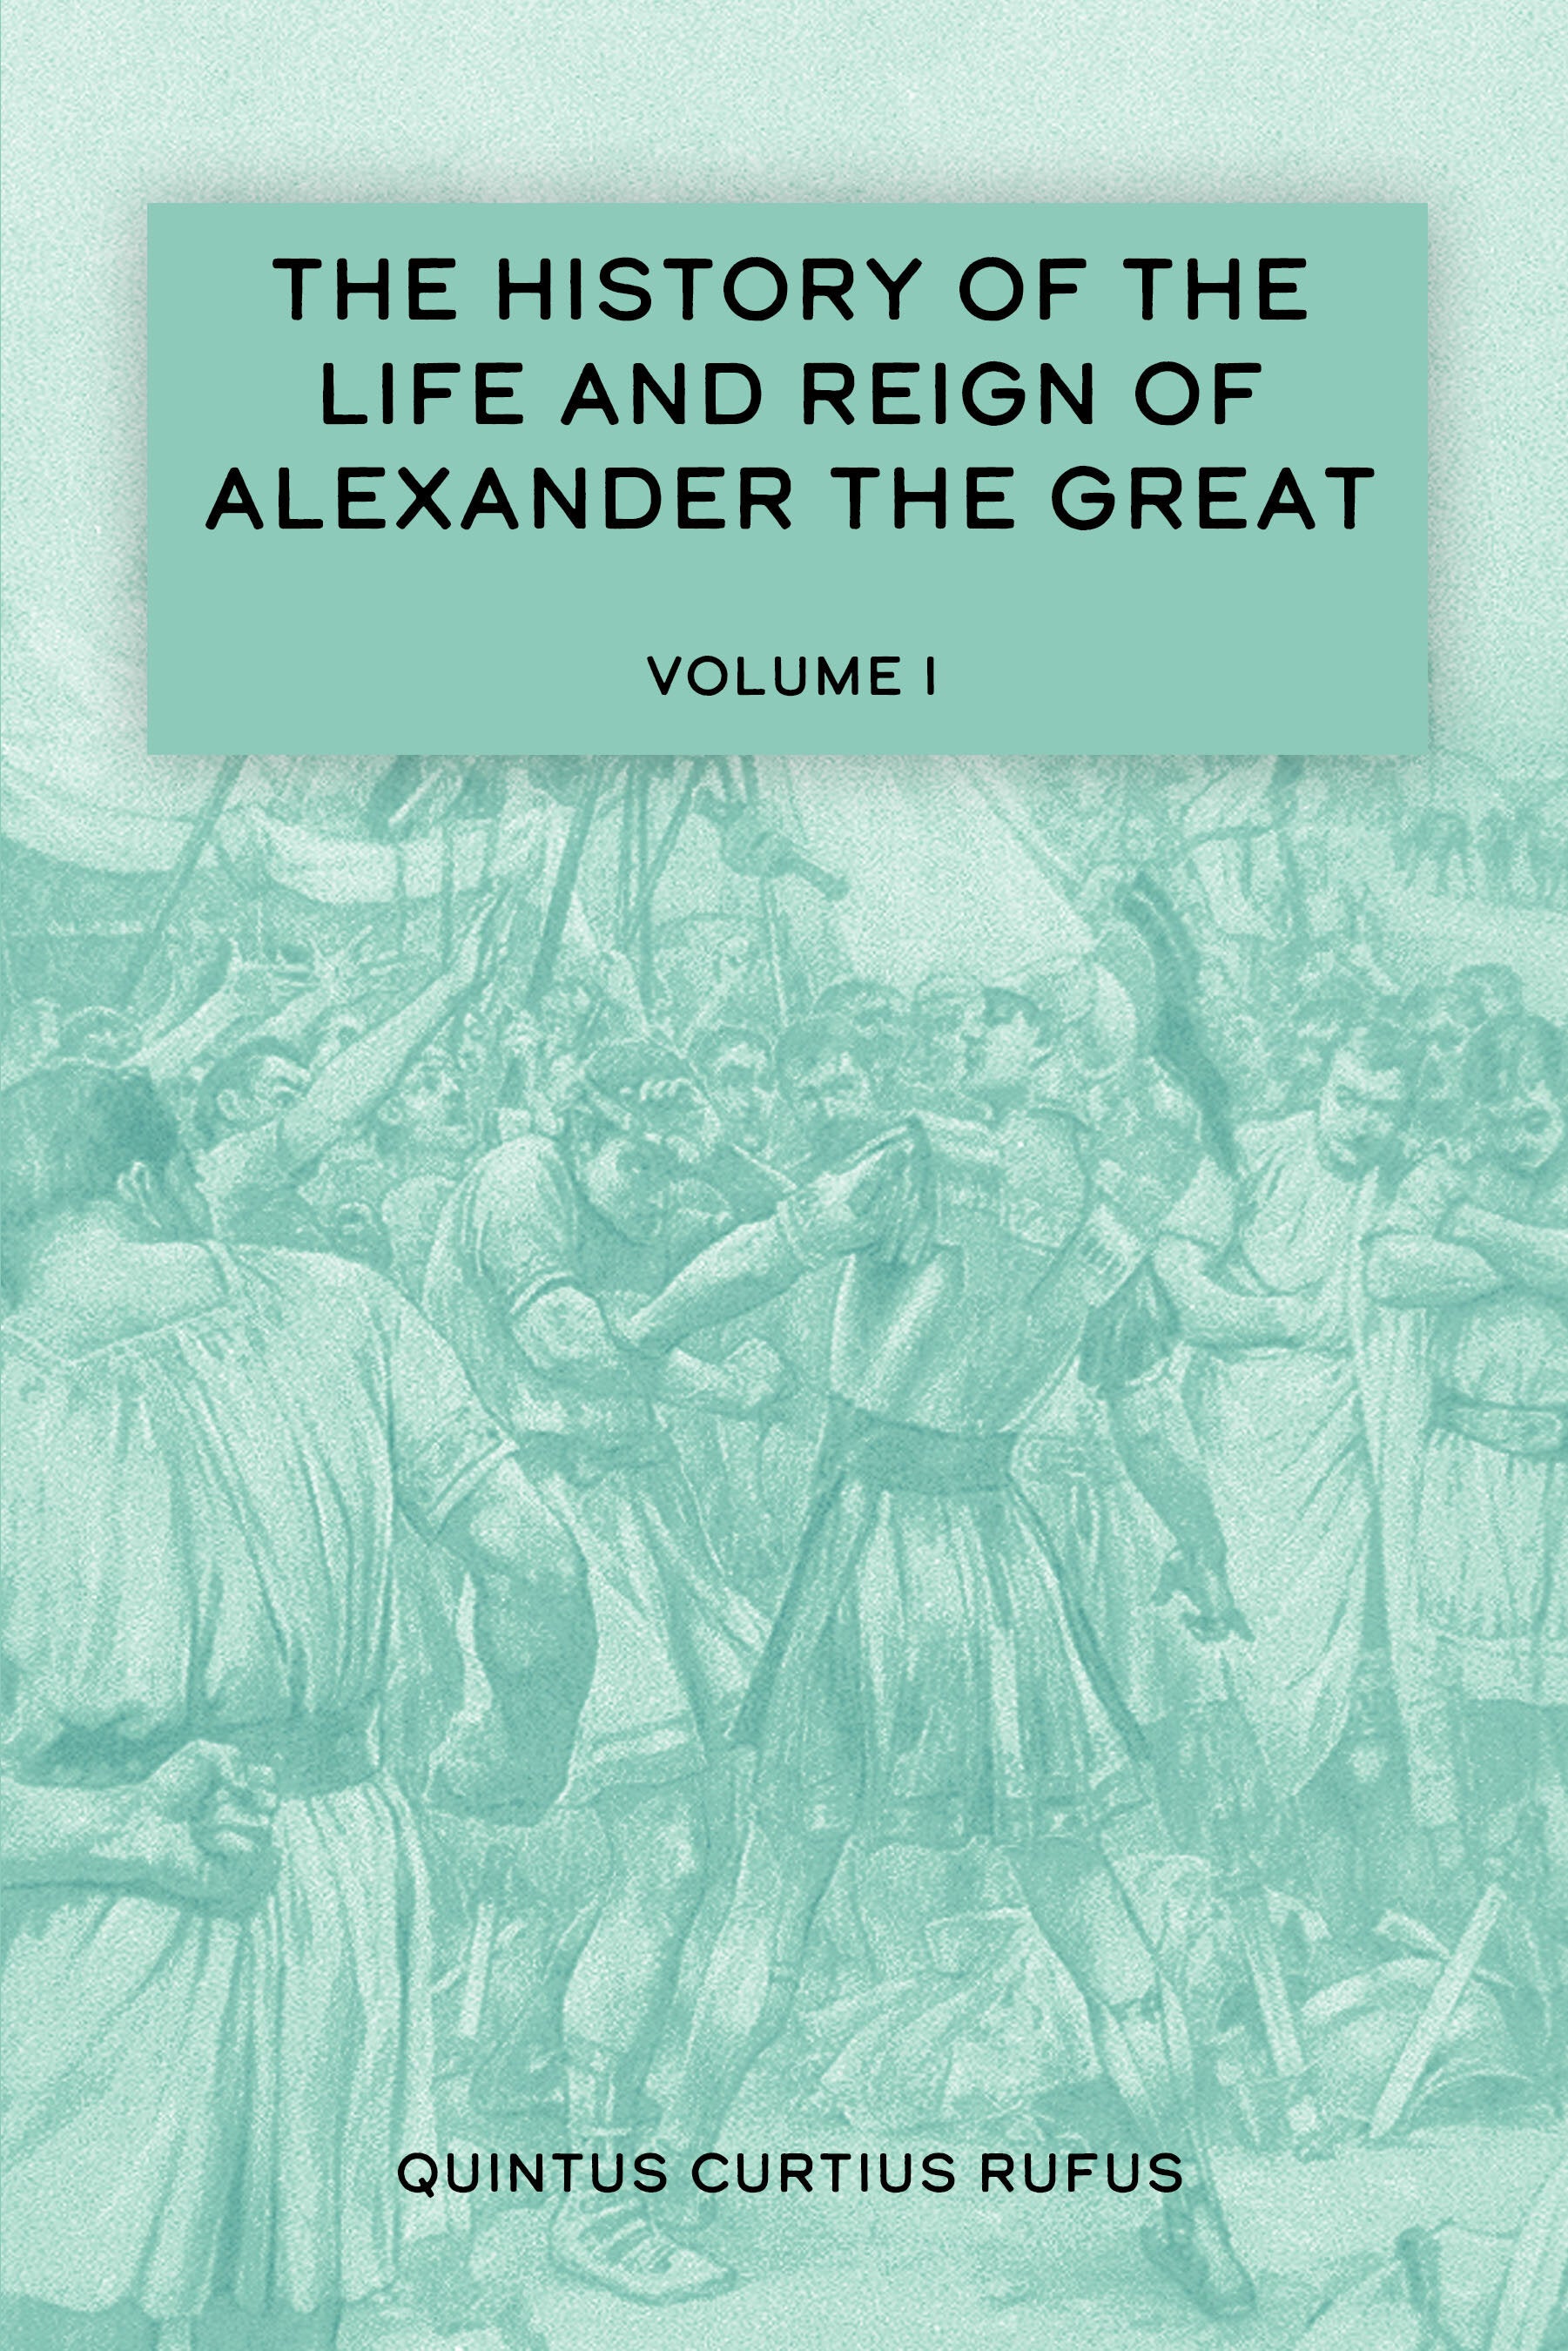 The History of the Life and Reign of Alexander the Great Volume I